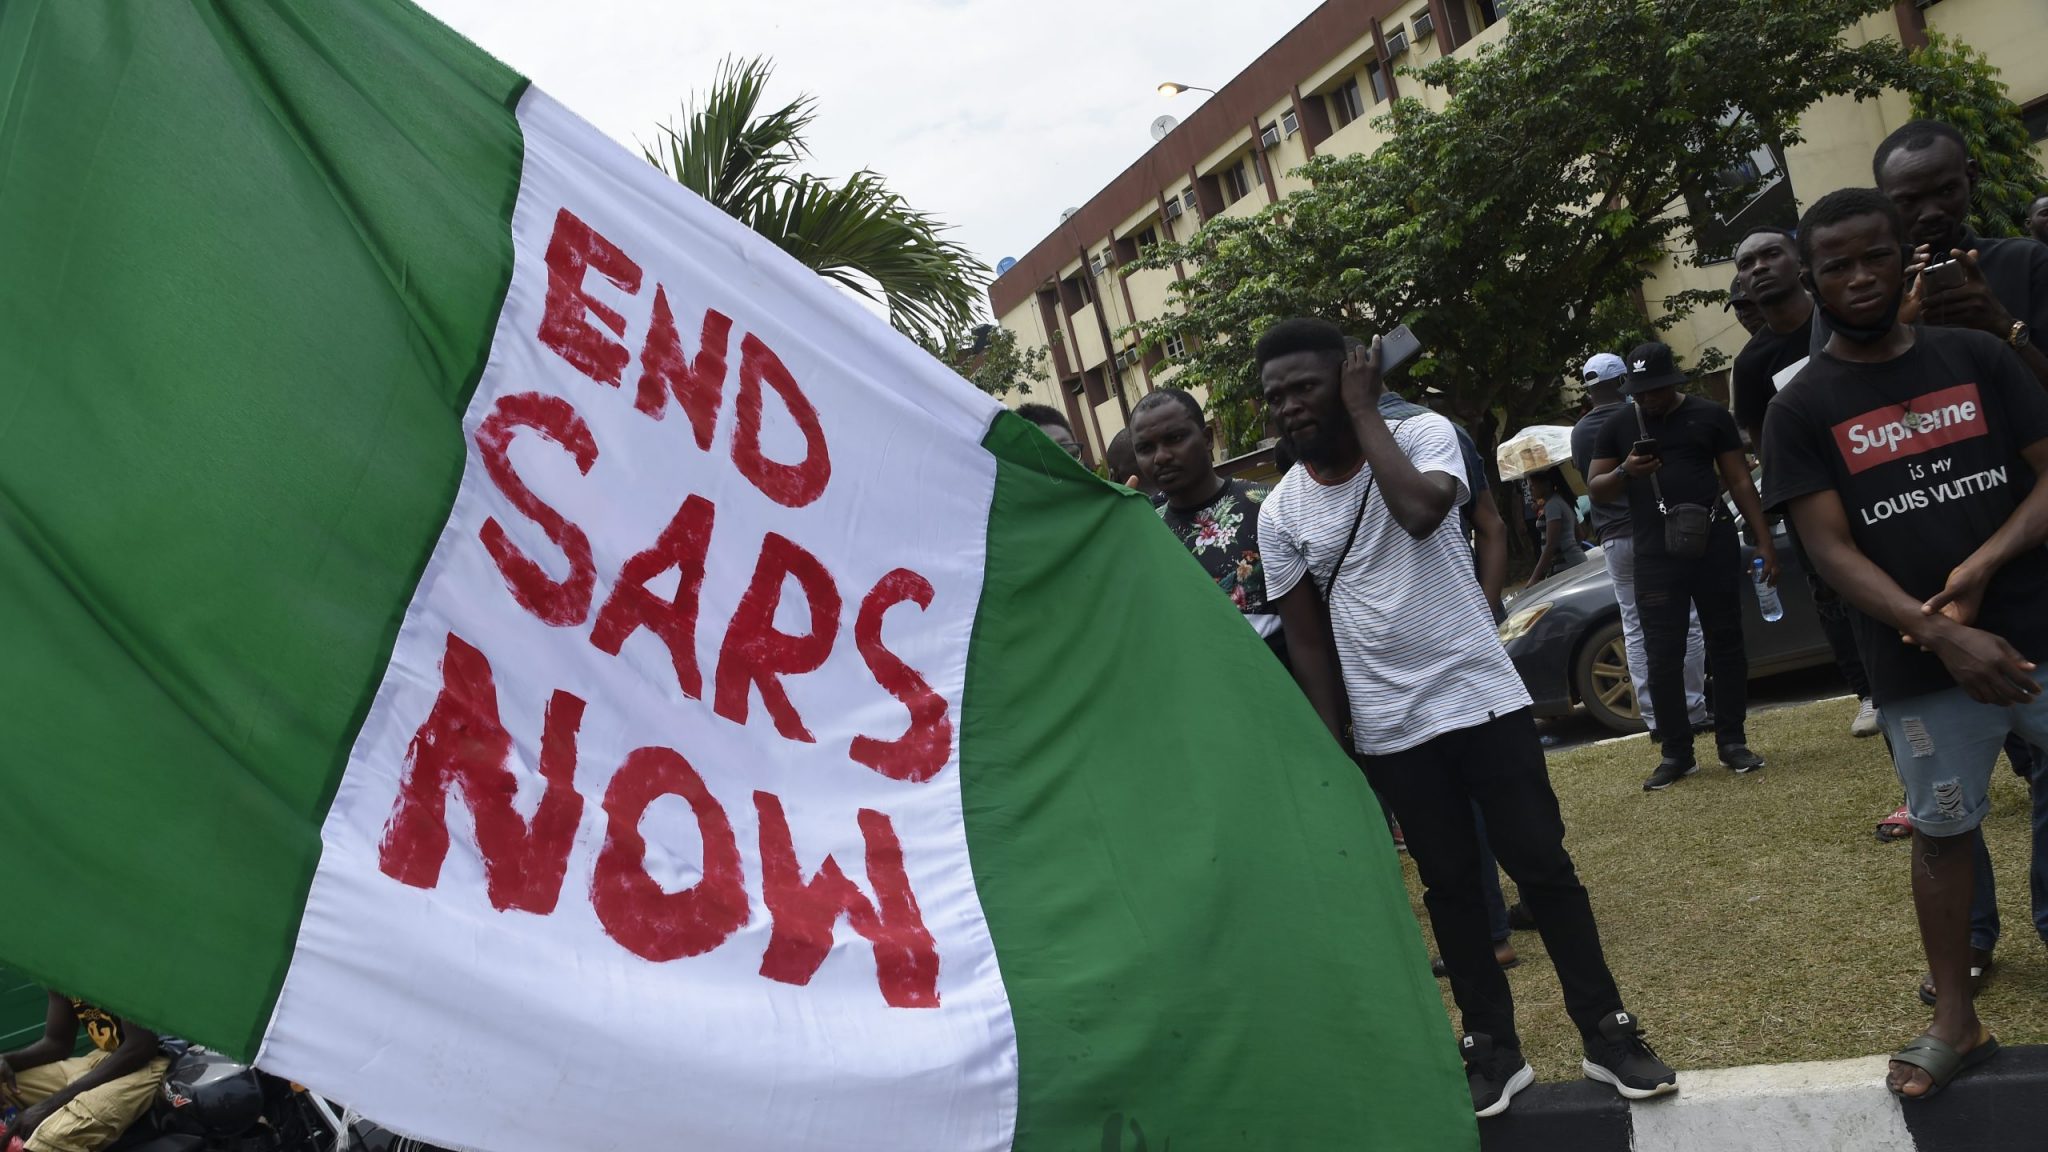 When leaders fail to lead… & the #endsars protest turns tragic